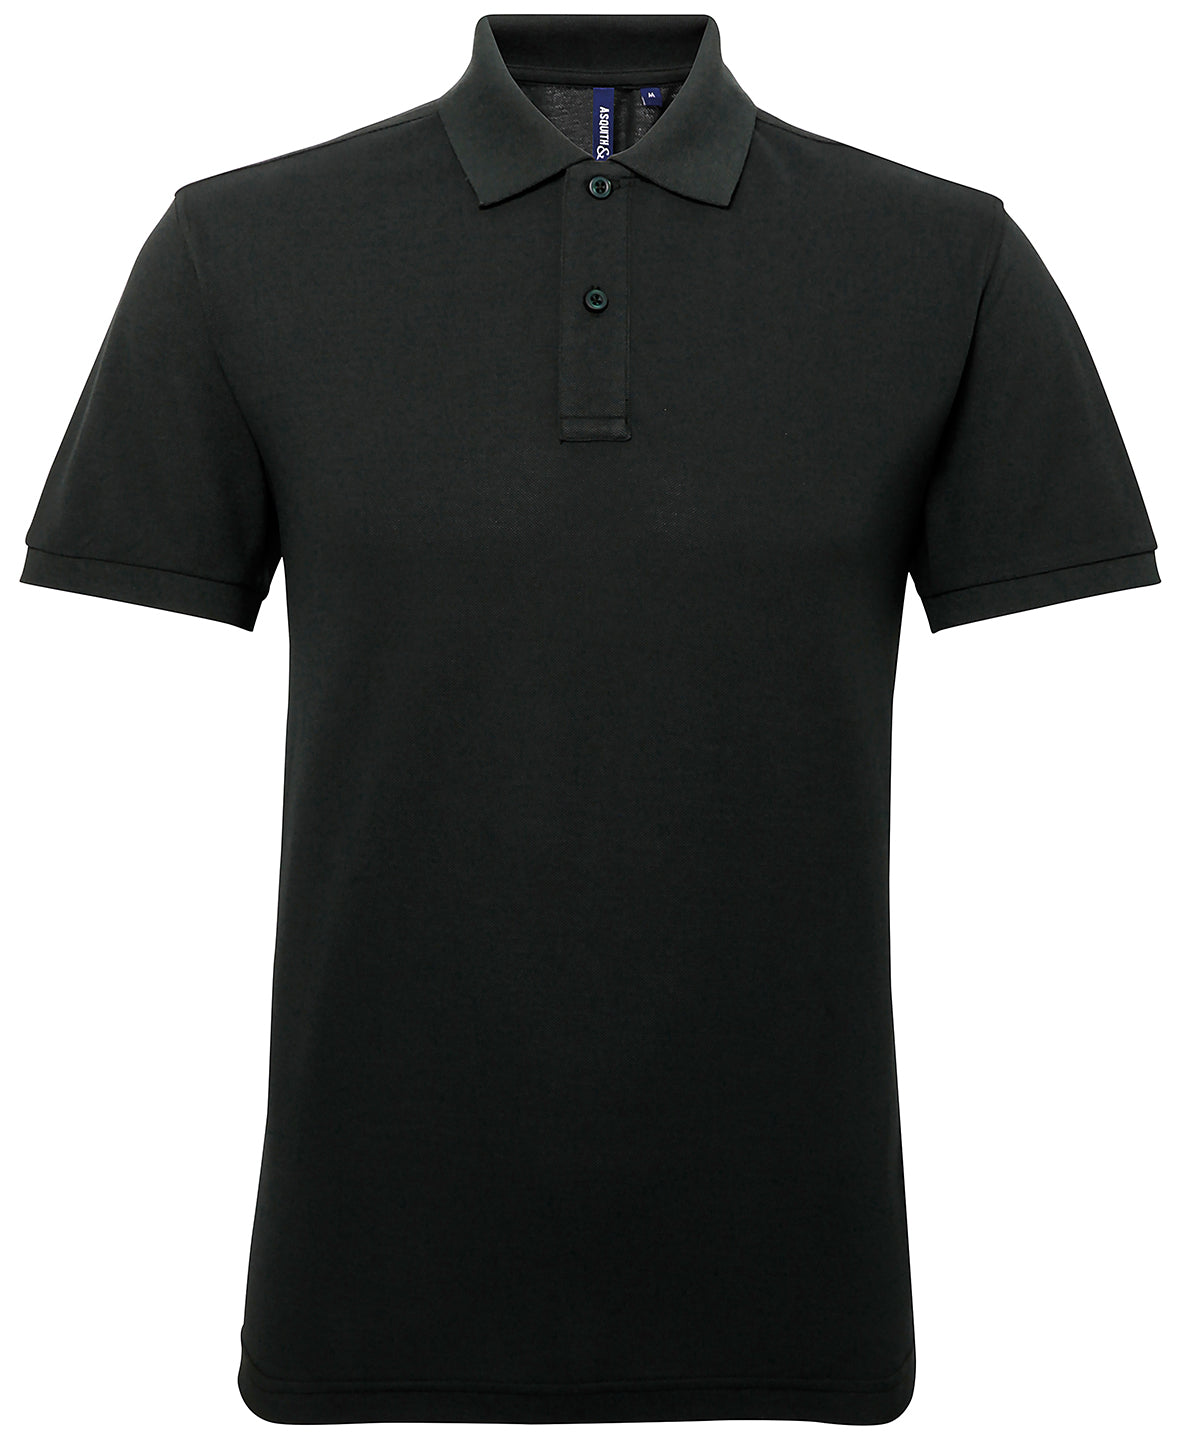 Personalised Polo Shirts - Dark Purple Asquith & Fox Men’s polycotton blend polo